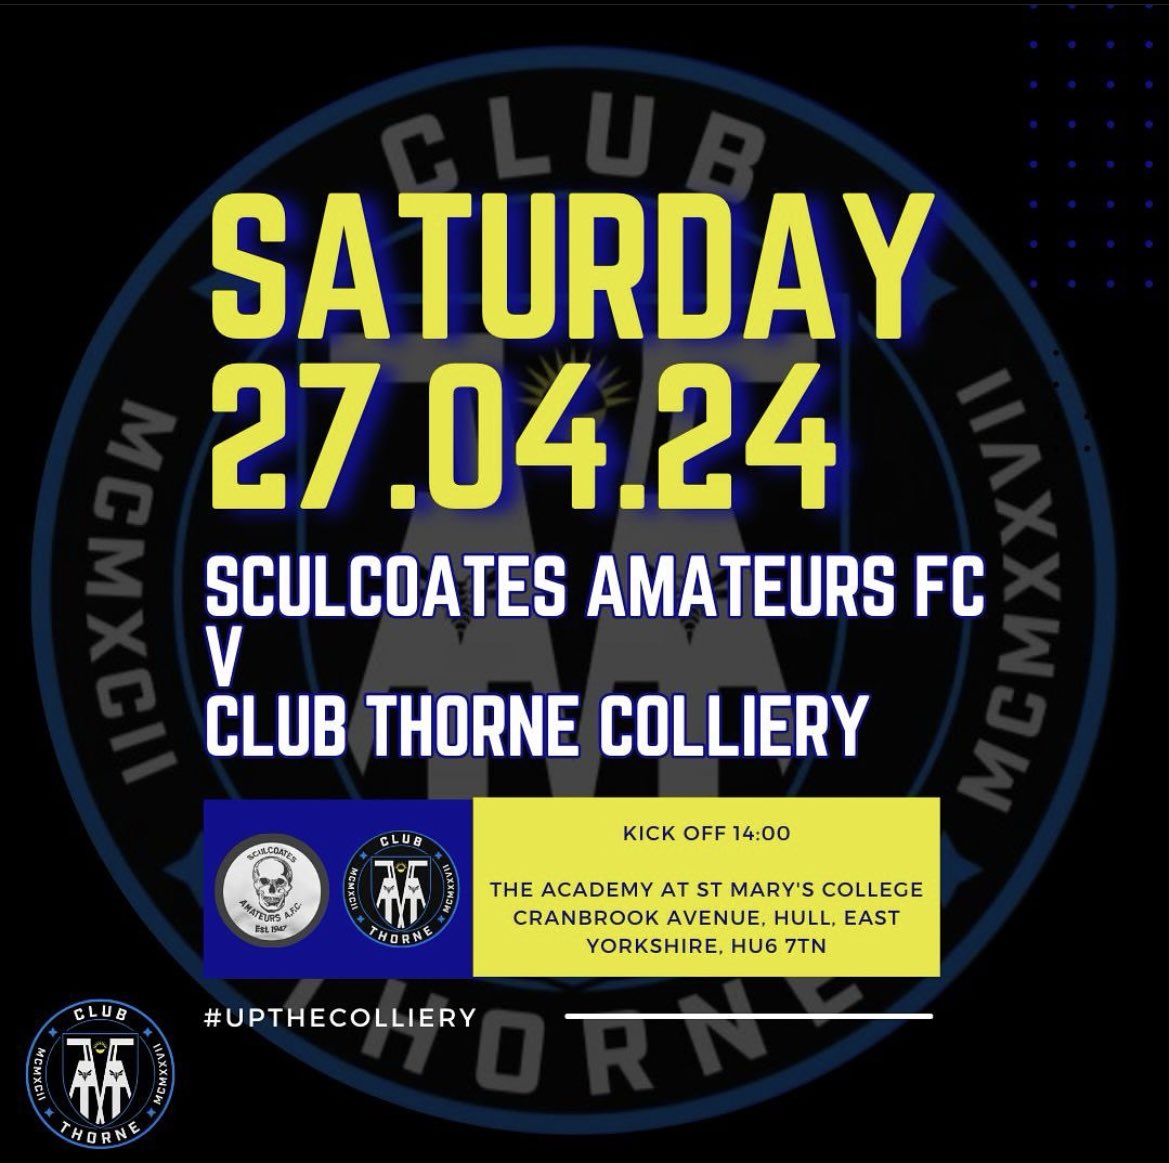 Tomorrow’s League fixture:

Sculcoates Amateurs v Club Thorne Colliery

📆 Saturday 27.04.24
⏰ 14:00 kick off 
📍The Academy, St Mary’s College, Cranbook Avenue, Hull, East Yorkshire, HU6 7TN

#humberpremierleague 
#colliery #clubthorne #upthecolliery #clubthorneacademy #thorne